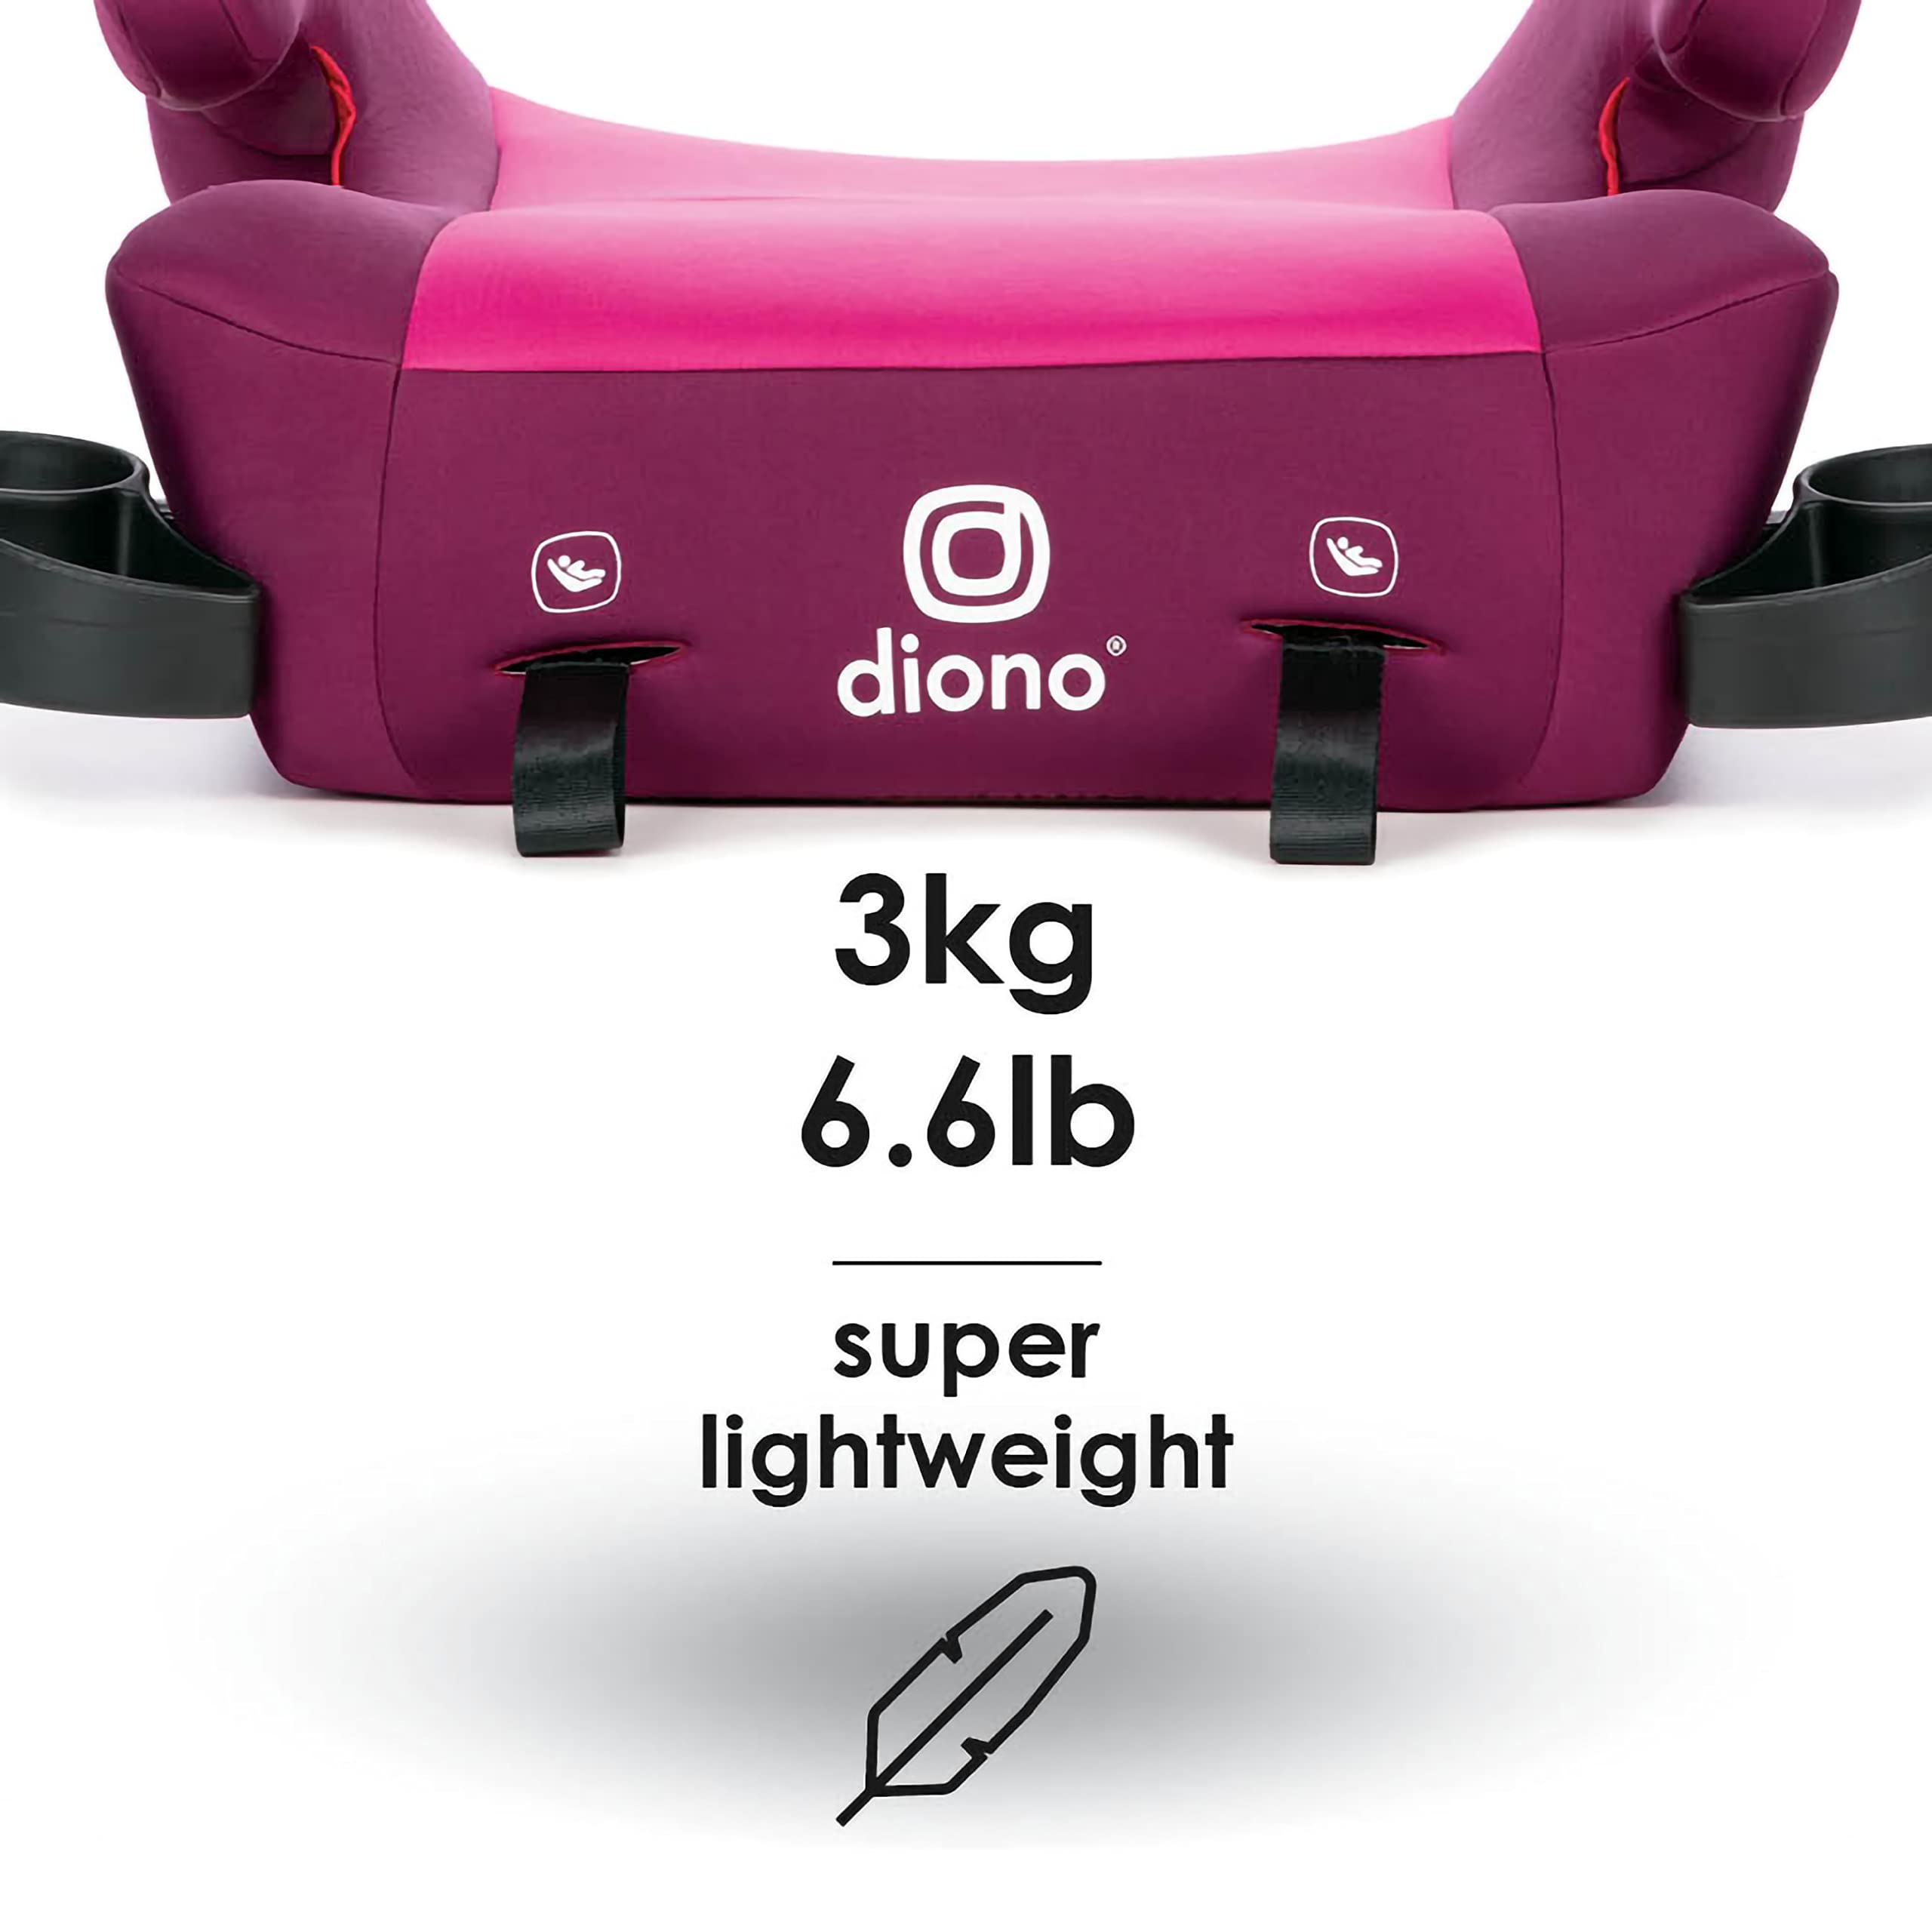 Diono Solana 2 XL 2022, Dual Latch Connectors, Lightweight Backless Belt-Positioning Booster Car Seat, 8 Years 1 Booster Seat, Pink